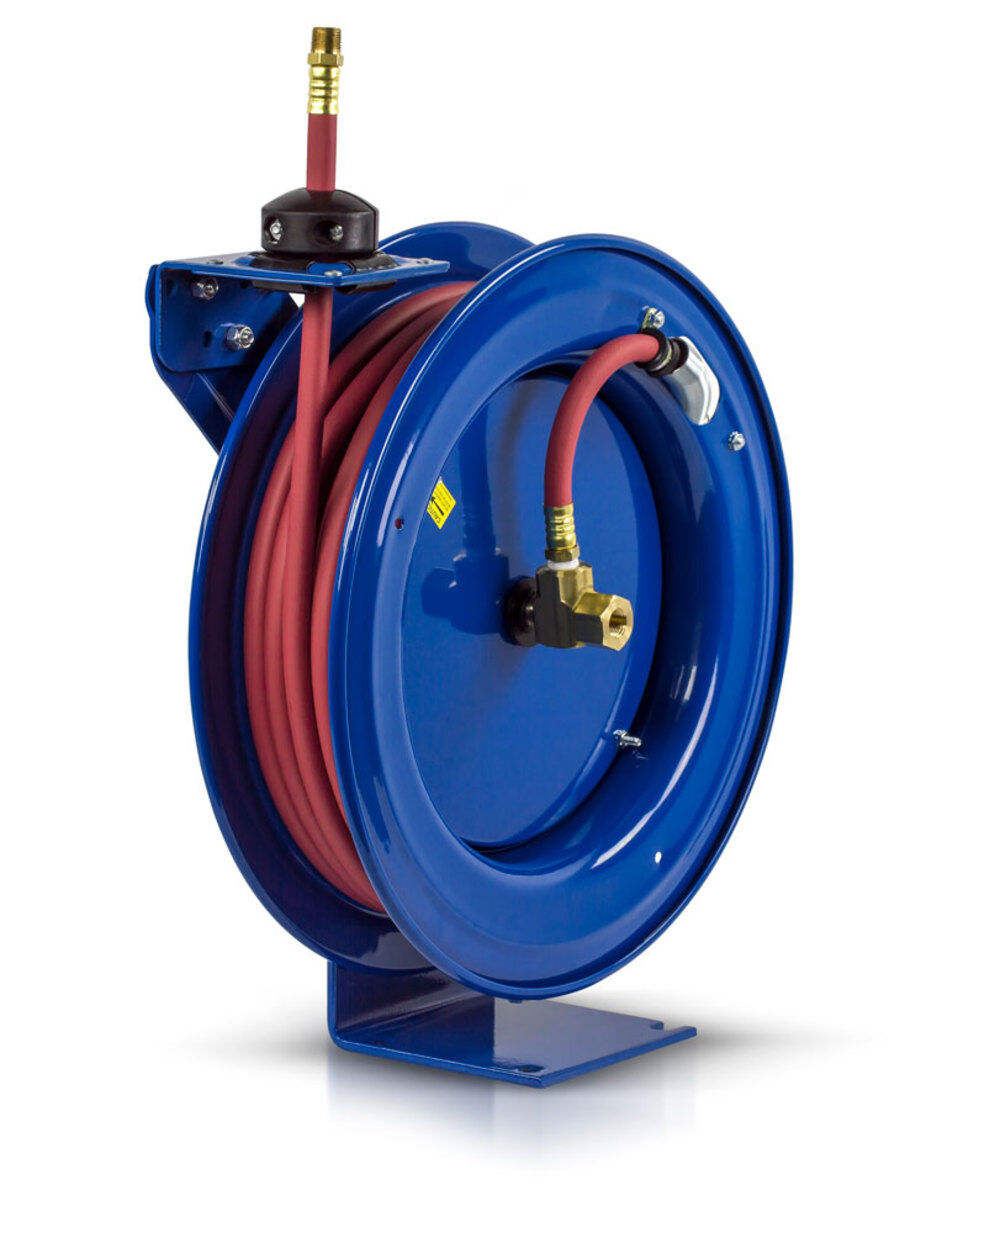 buy Bargain Sale 3/8 in x 50 ft Performance Spring Driven Hose Reel, 300PSI  cheap on